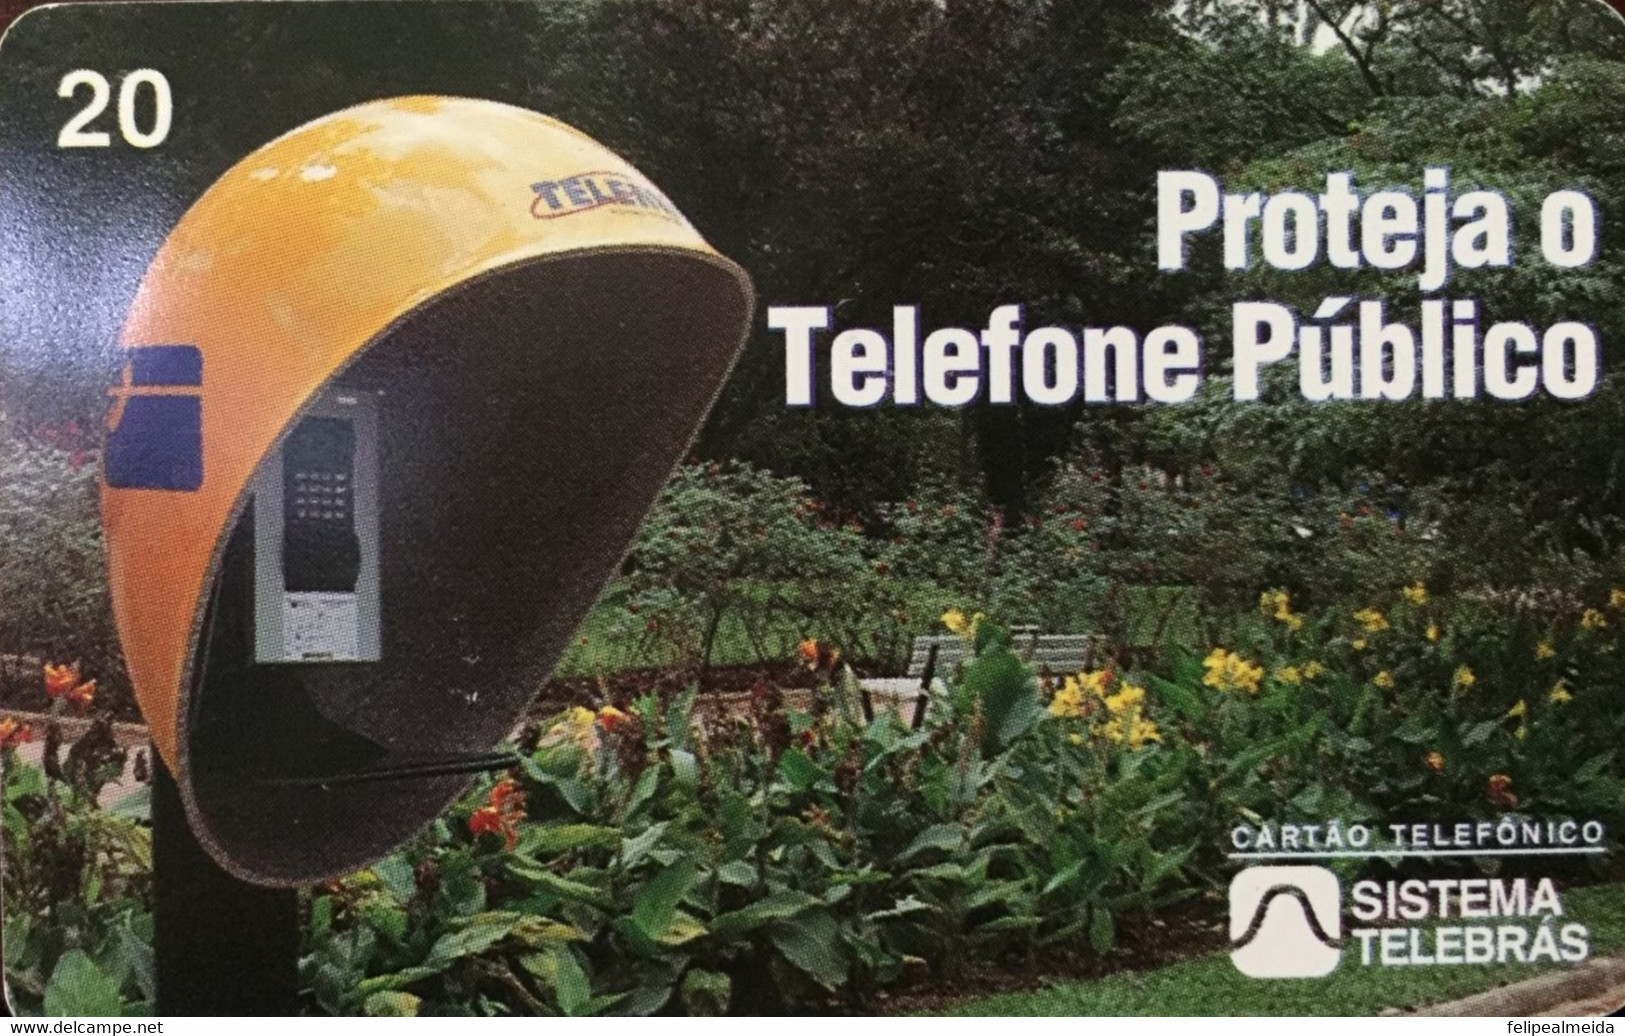 Phone Card Manufactured By Telebras In 1998 - Advertising Campaign For The Conservation Of Public Telephones - Telecom Operators